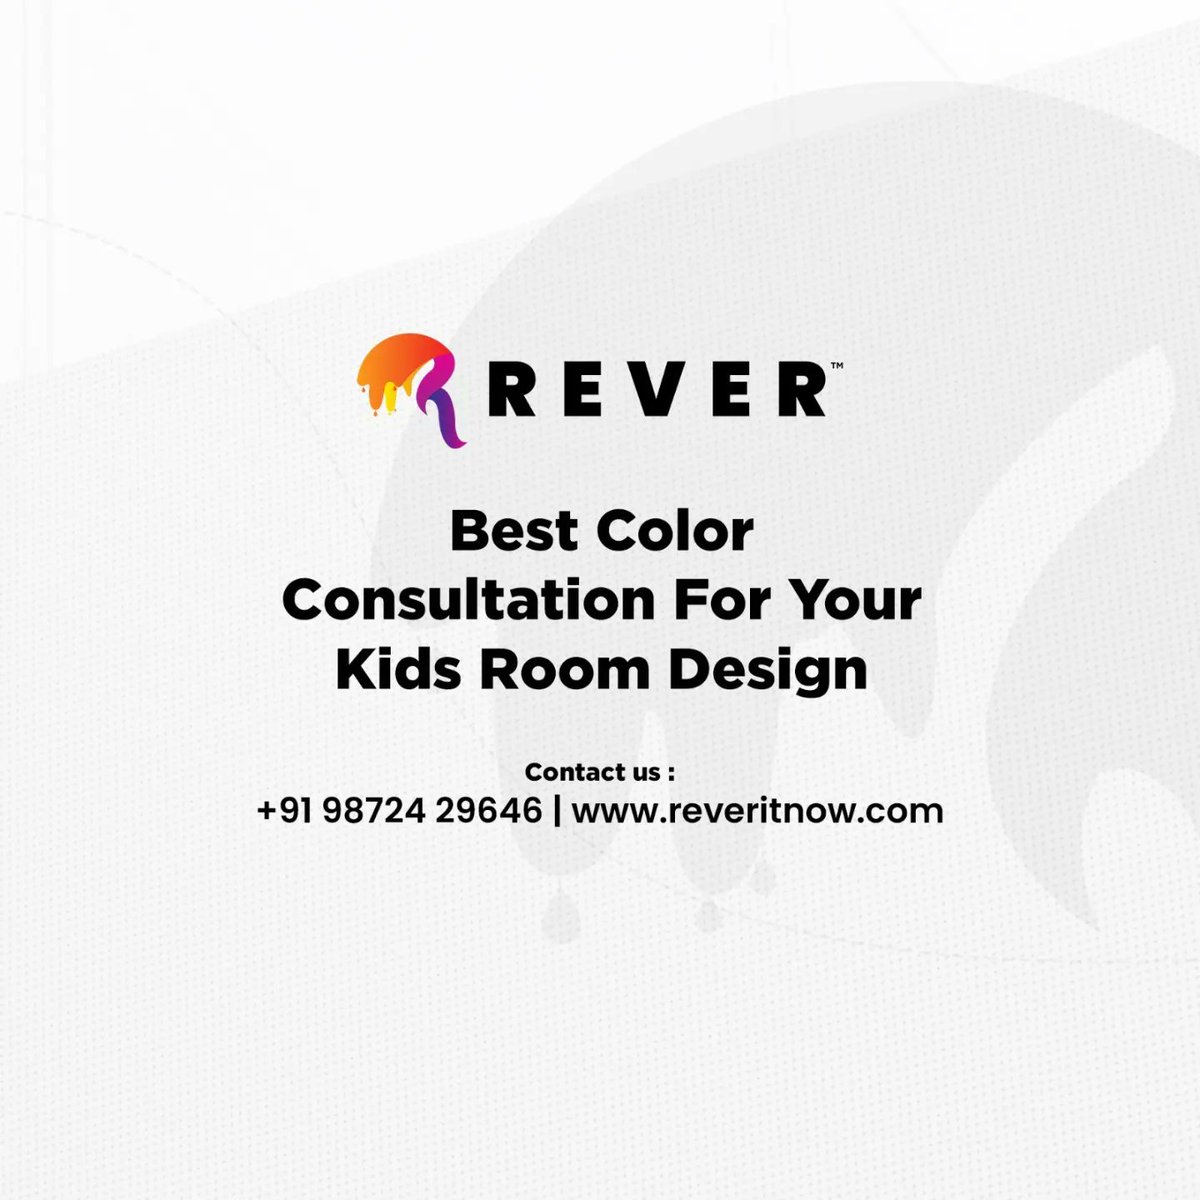 REVER Provides You 🫶Best 🎨Color Consultation For Your 👫Kids Rooms.

#reveritnow #exteriorpainting #housepainting #wallpaintings #residentialpainting #homepainting #homedecor #paint #wall #kidsroomdecor   #kidsroomdesign #kidsroom #kidsroominspiration #kidroomdecor